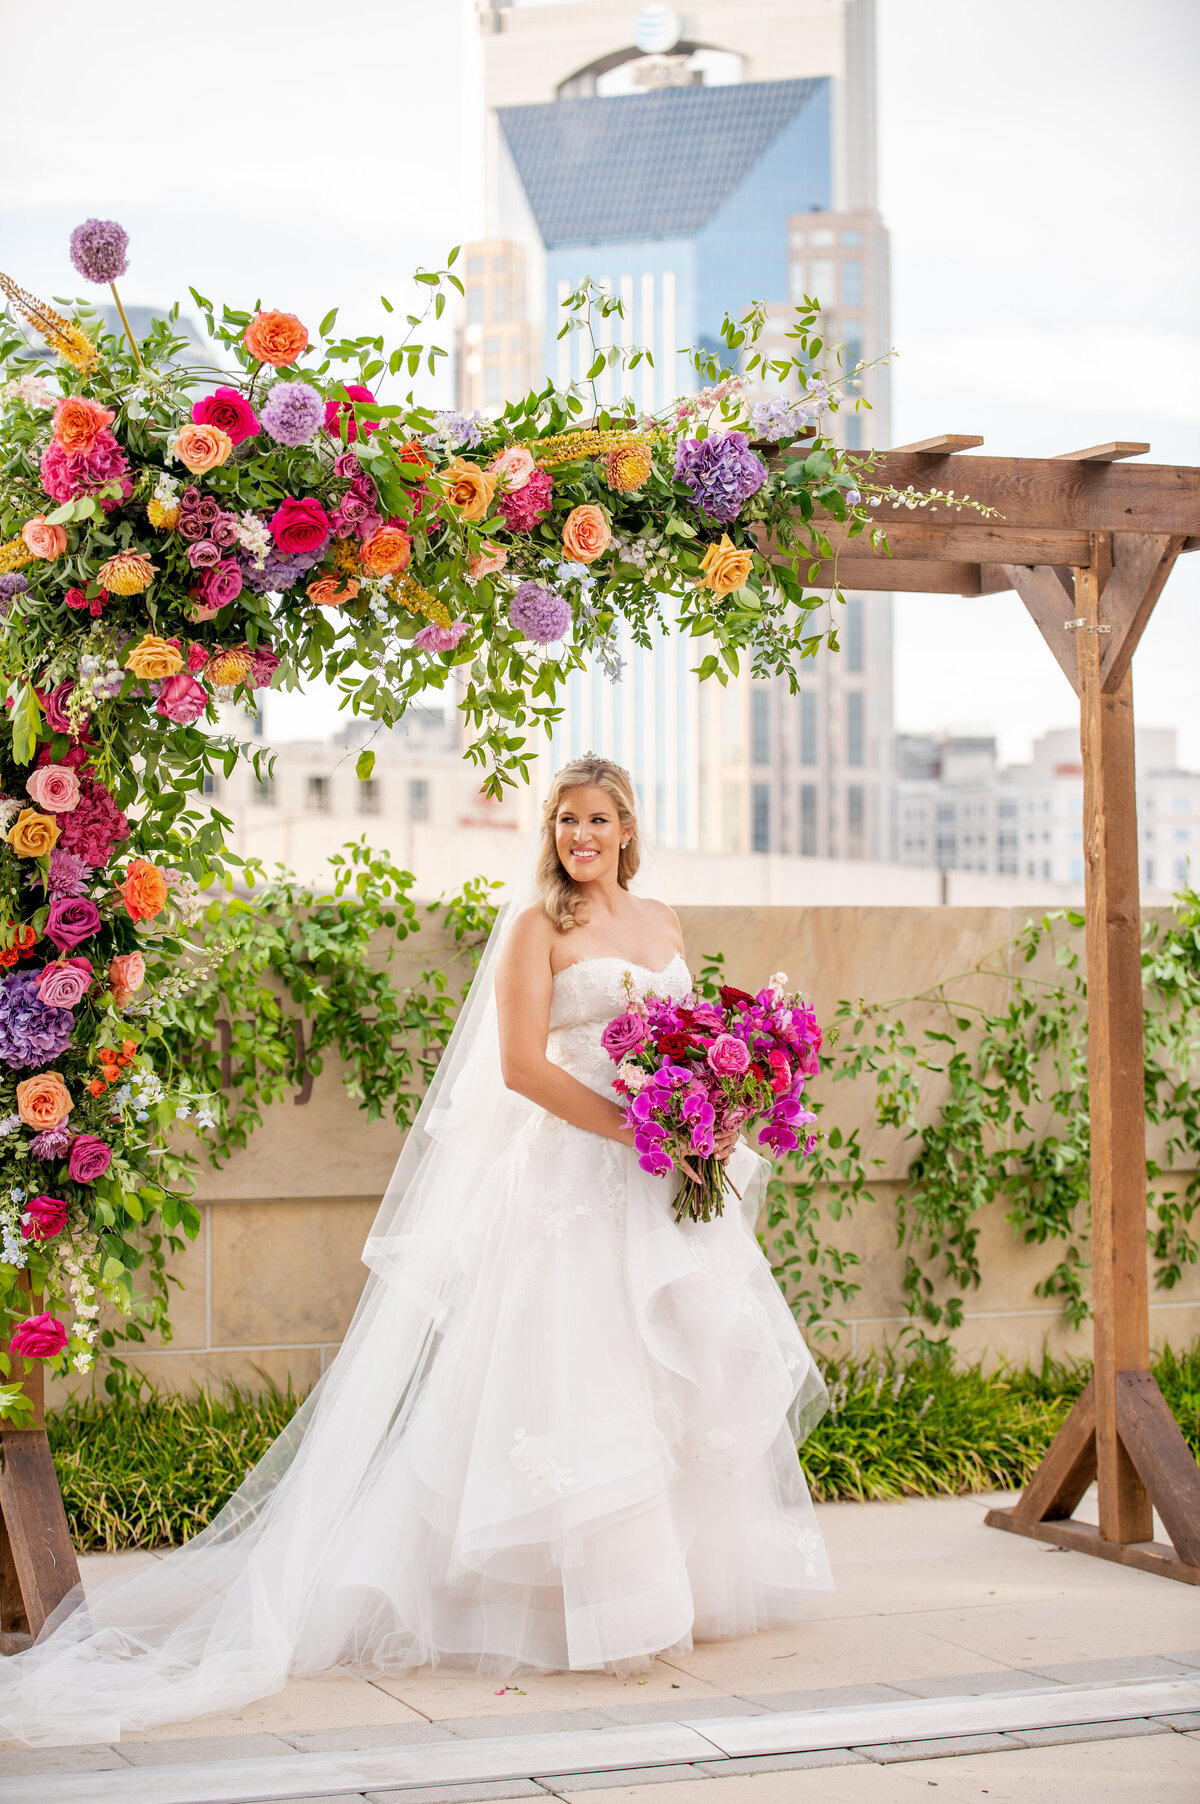 Artful ceremony arch florals in sunset hues of pink, fuchsia, lavender, and orange composed of hydrangeas, delphinium, eremurus, snapdragon, and petal heavy roses. Design by Rosemary and Finch in Nashville, TN.